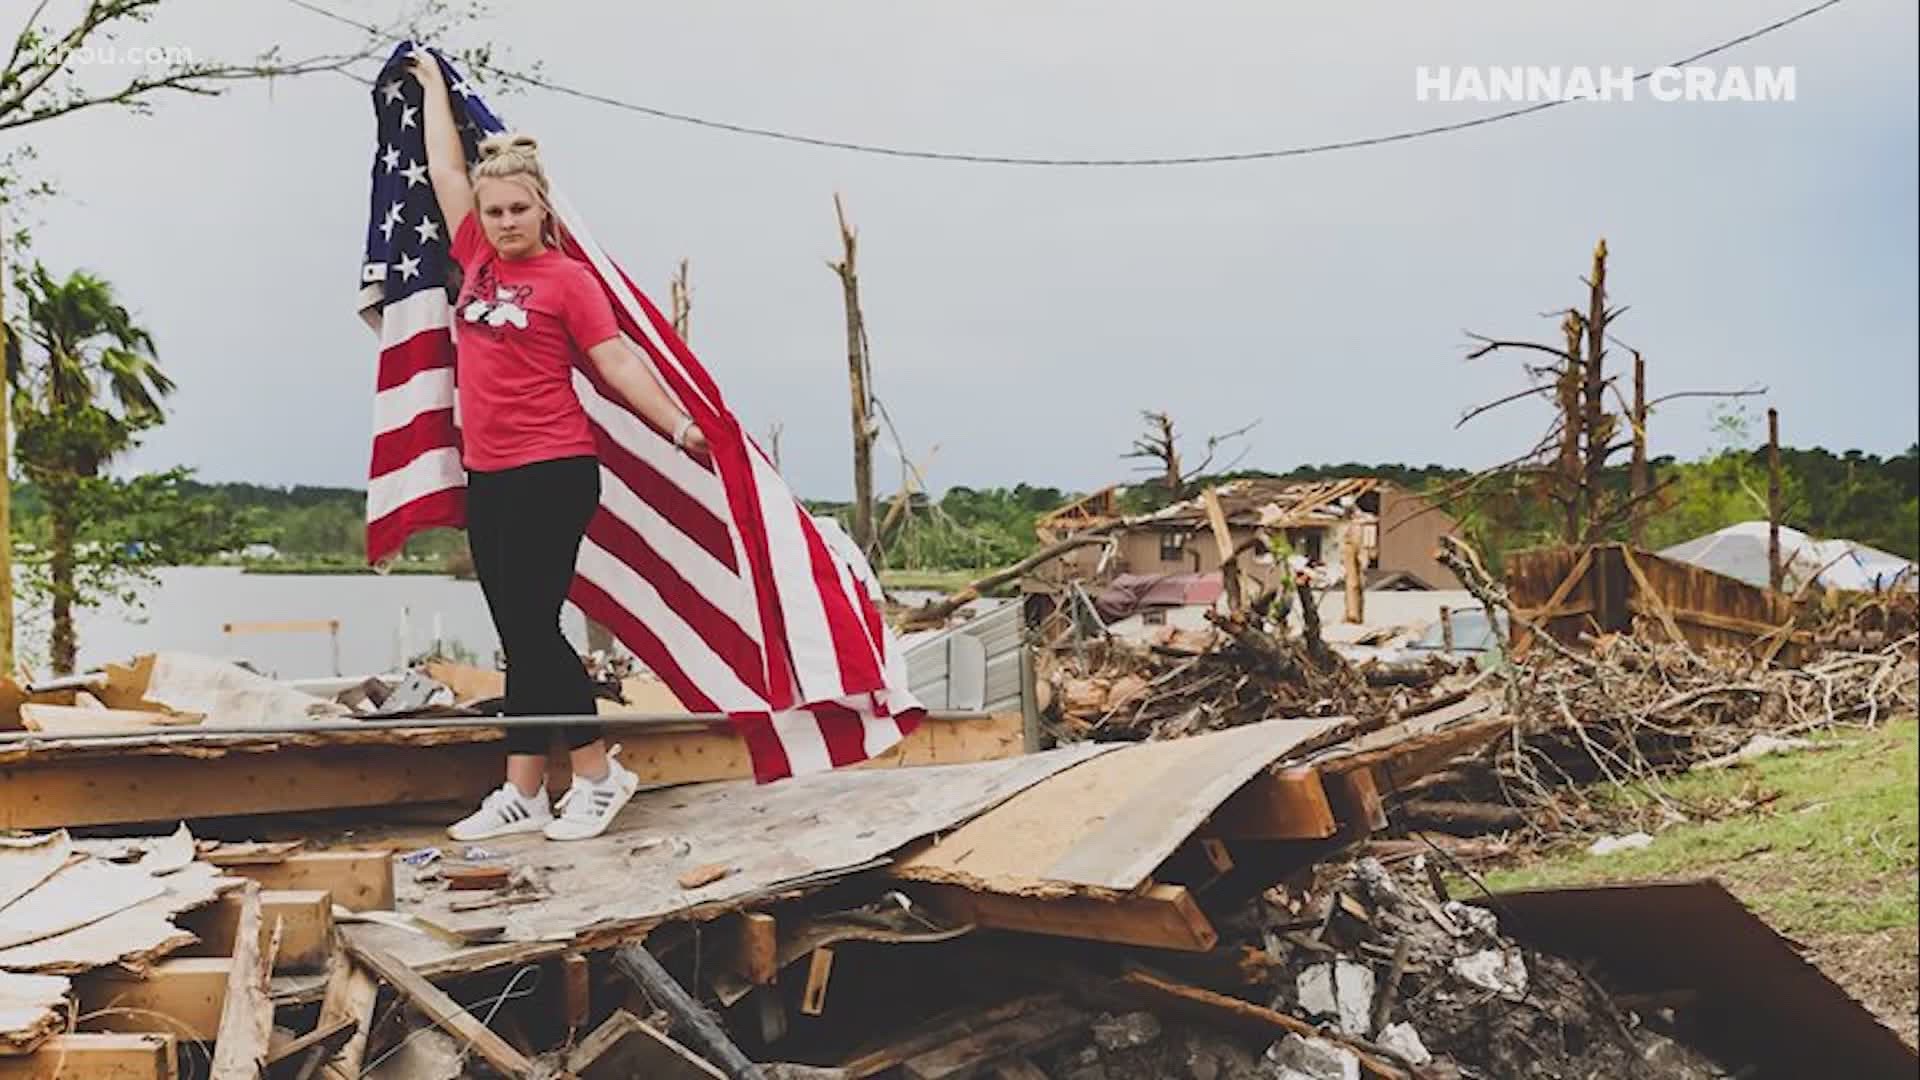 Madison Key went "all natural:" no makeup, no hairdo, taking her senior photos standing on top of the rubble of her lake house.